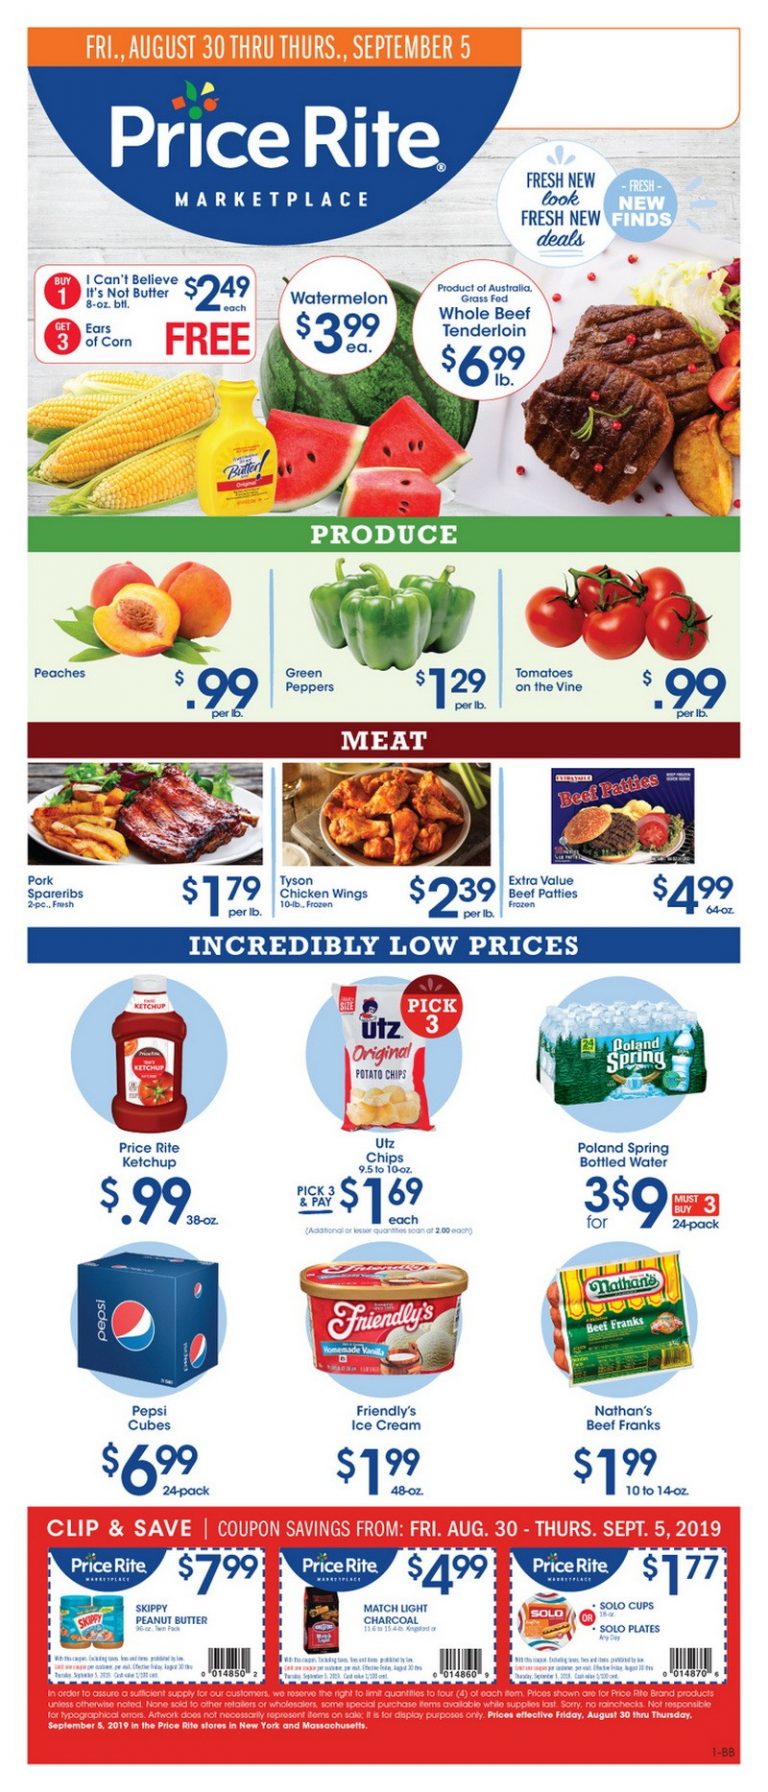 Price Rite Weekly Ad Aug 30 Sep 05 2019